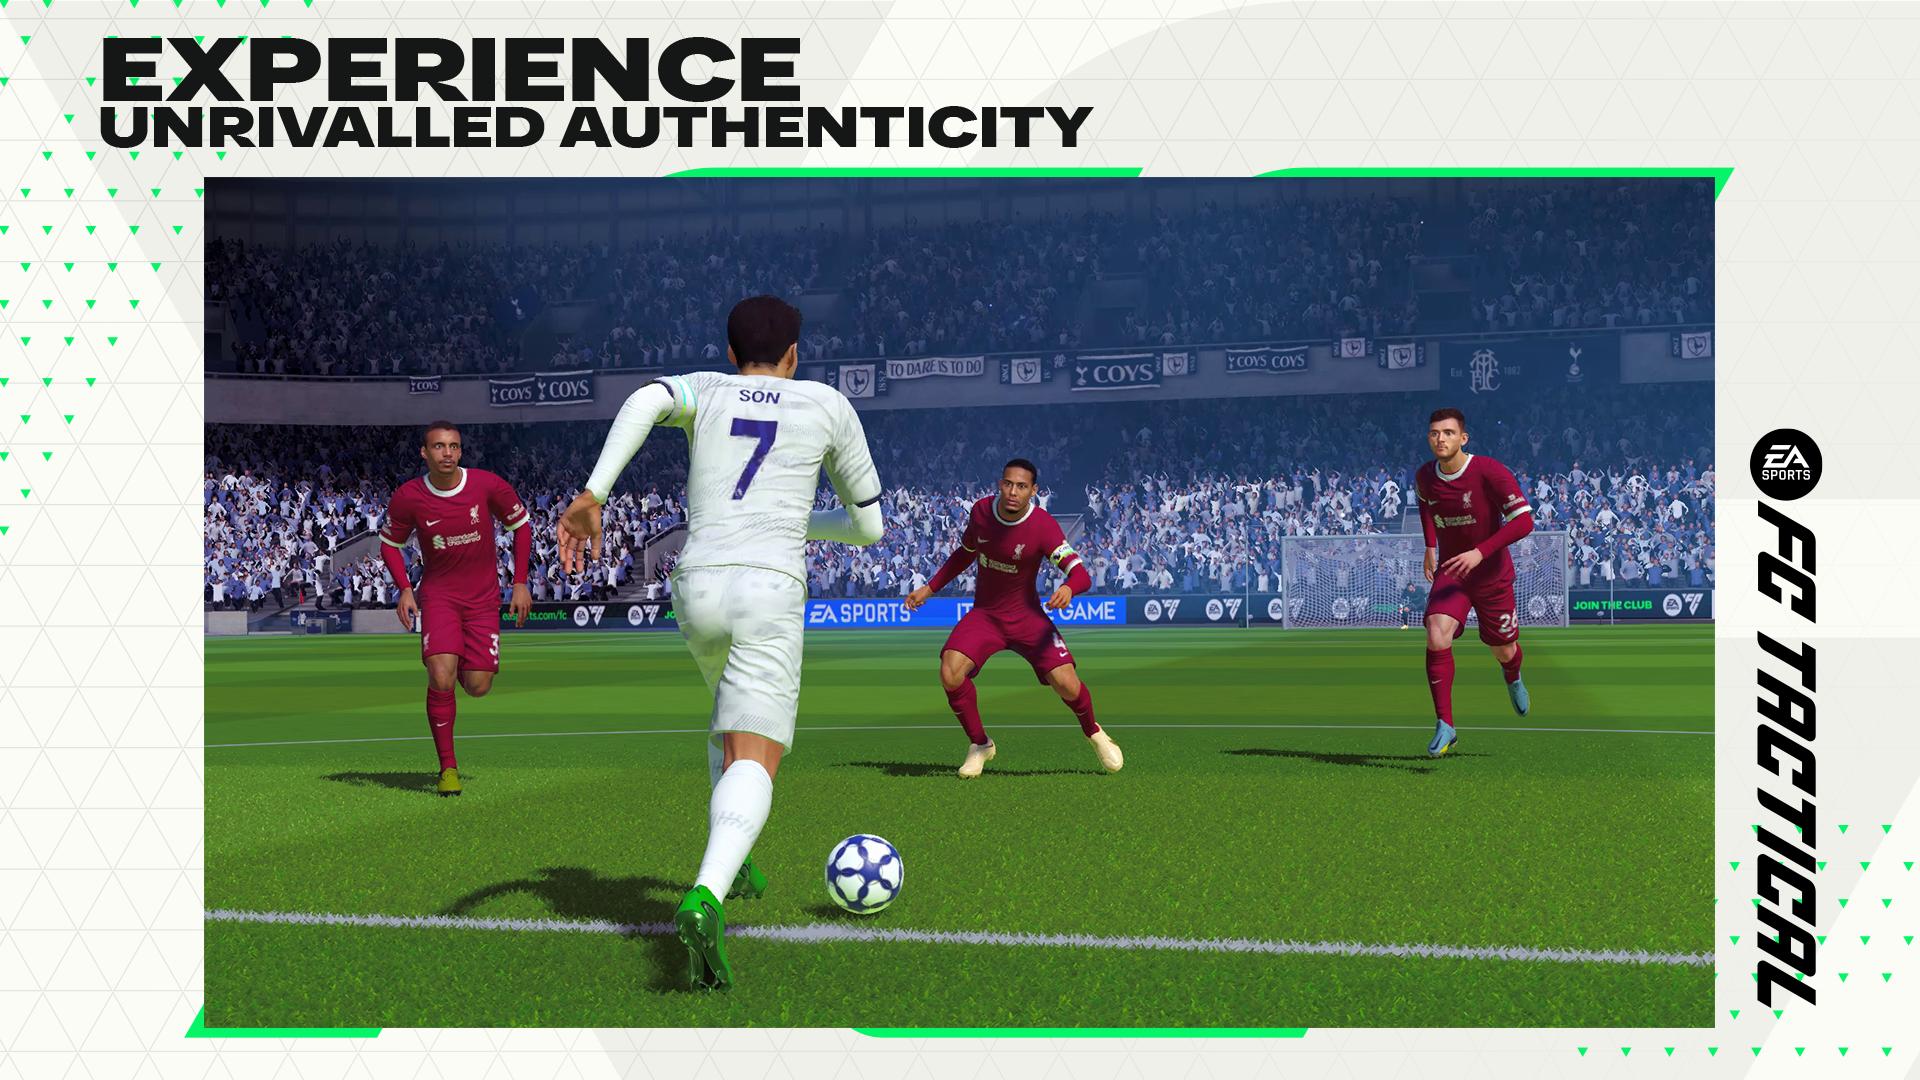 How to Play EA SPORTS FC™ Tactical on PC or Mac with BlueStacks